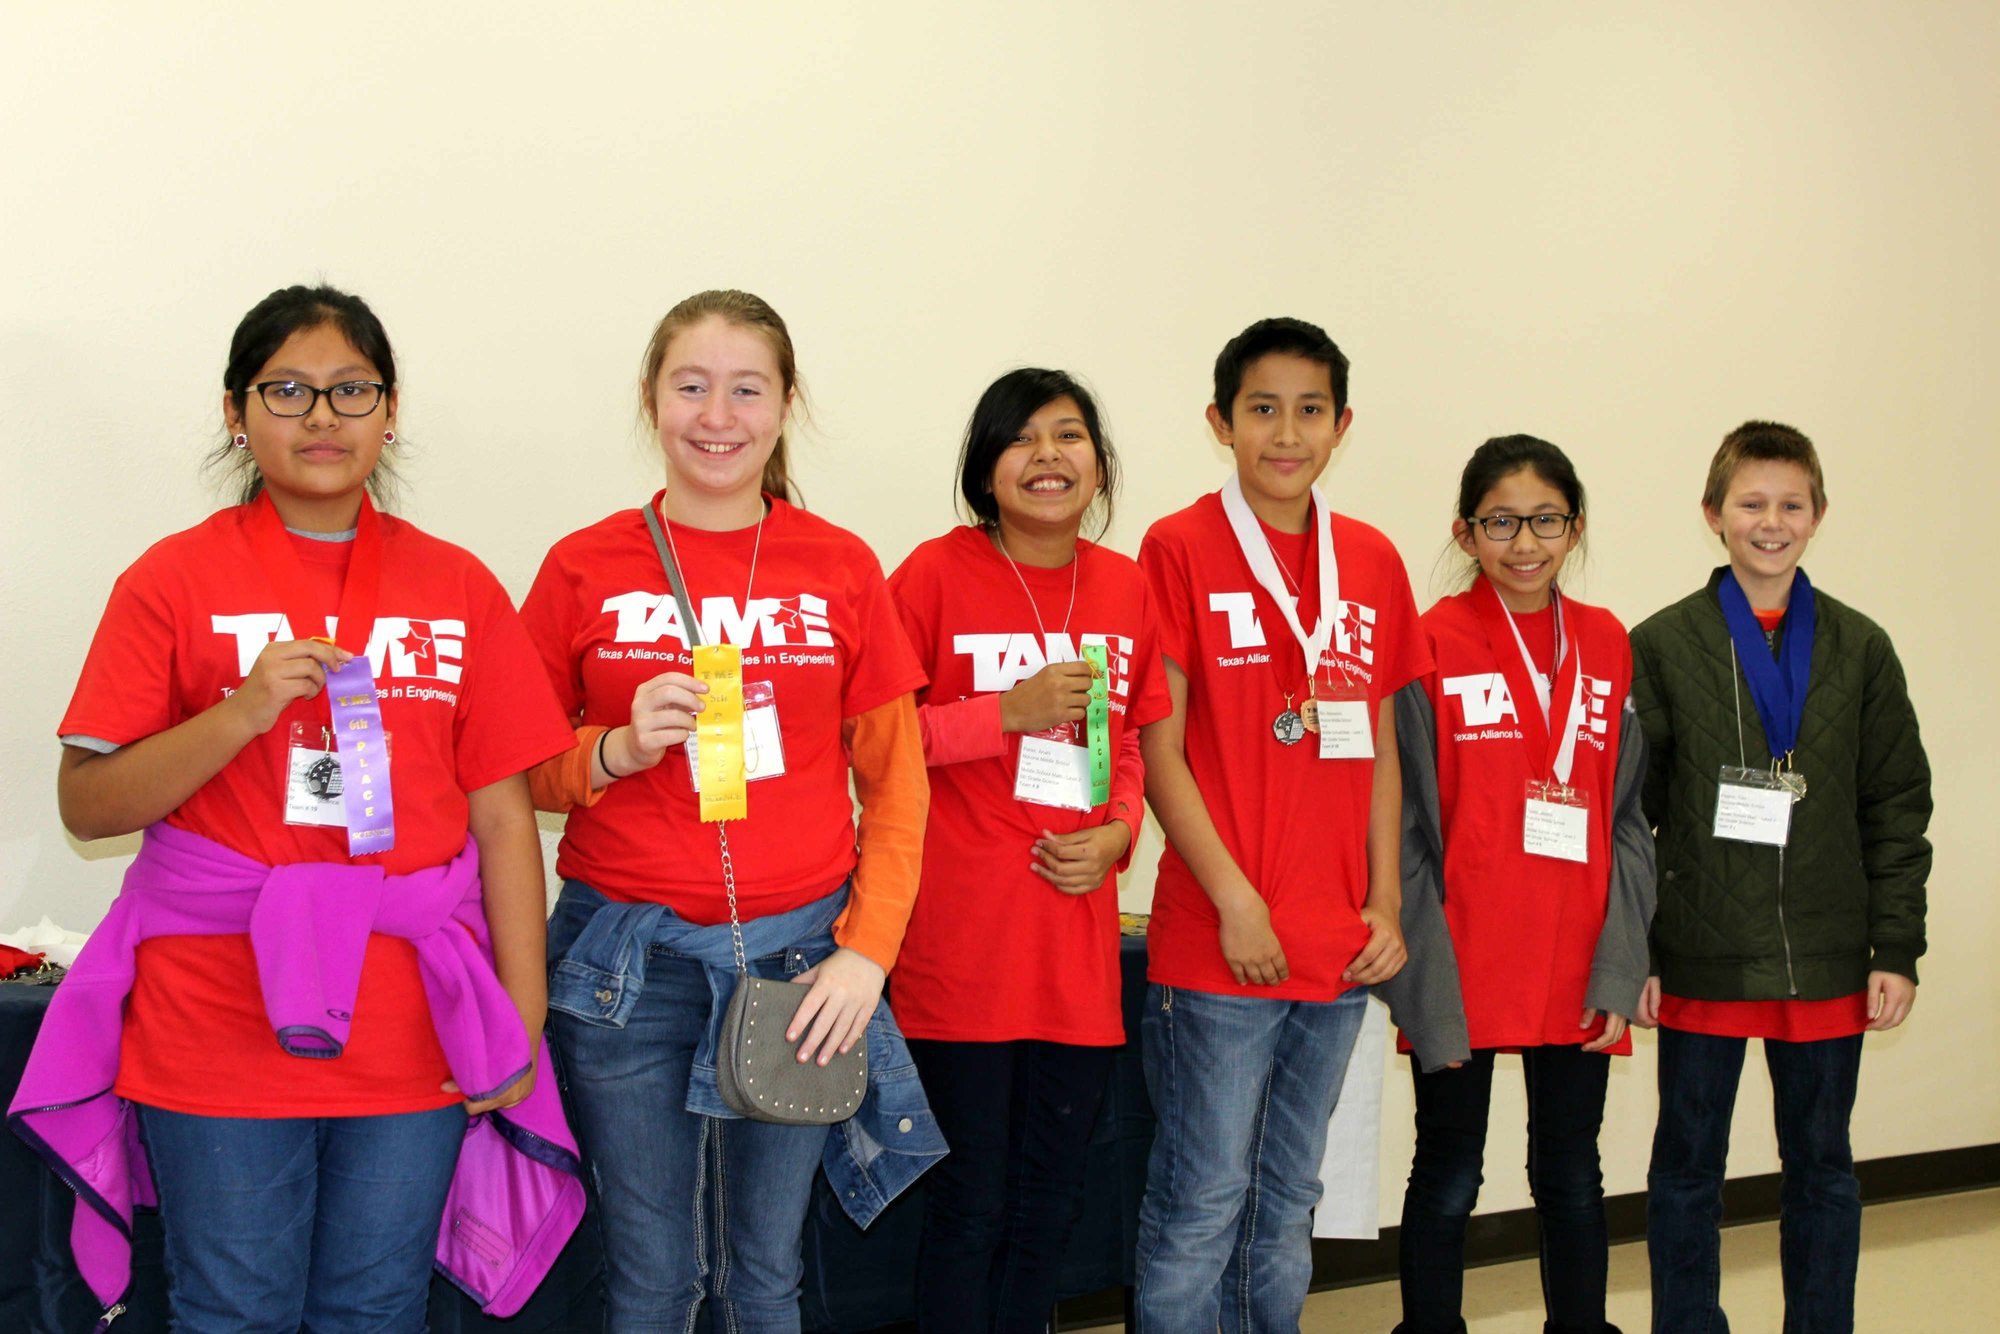 The 2016 TAME Wichita Falls STEM Competition was sponsored by Alcoa, hosted at Midwestern State University on Saturday January 23, 2016.